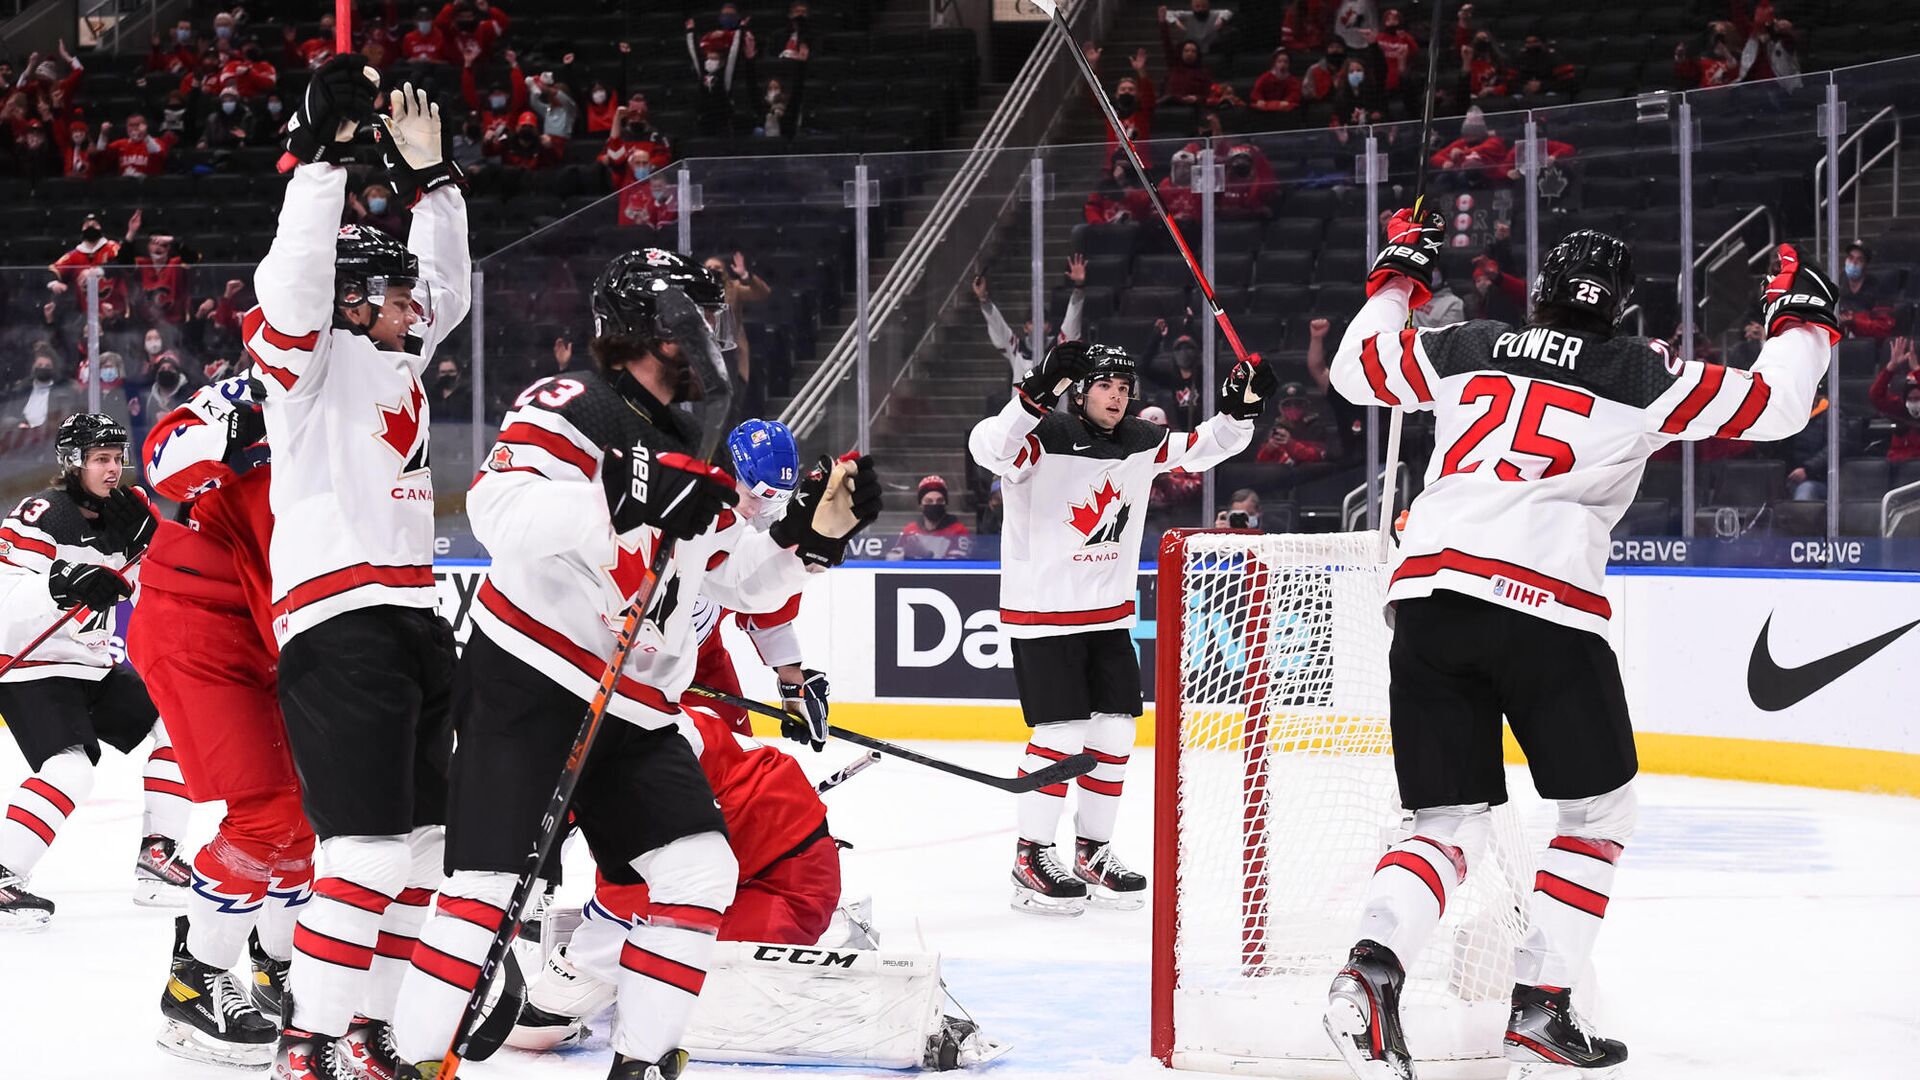 Canadians take their third victory at the Junior Ice Hockey World